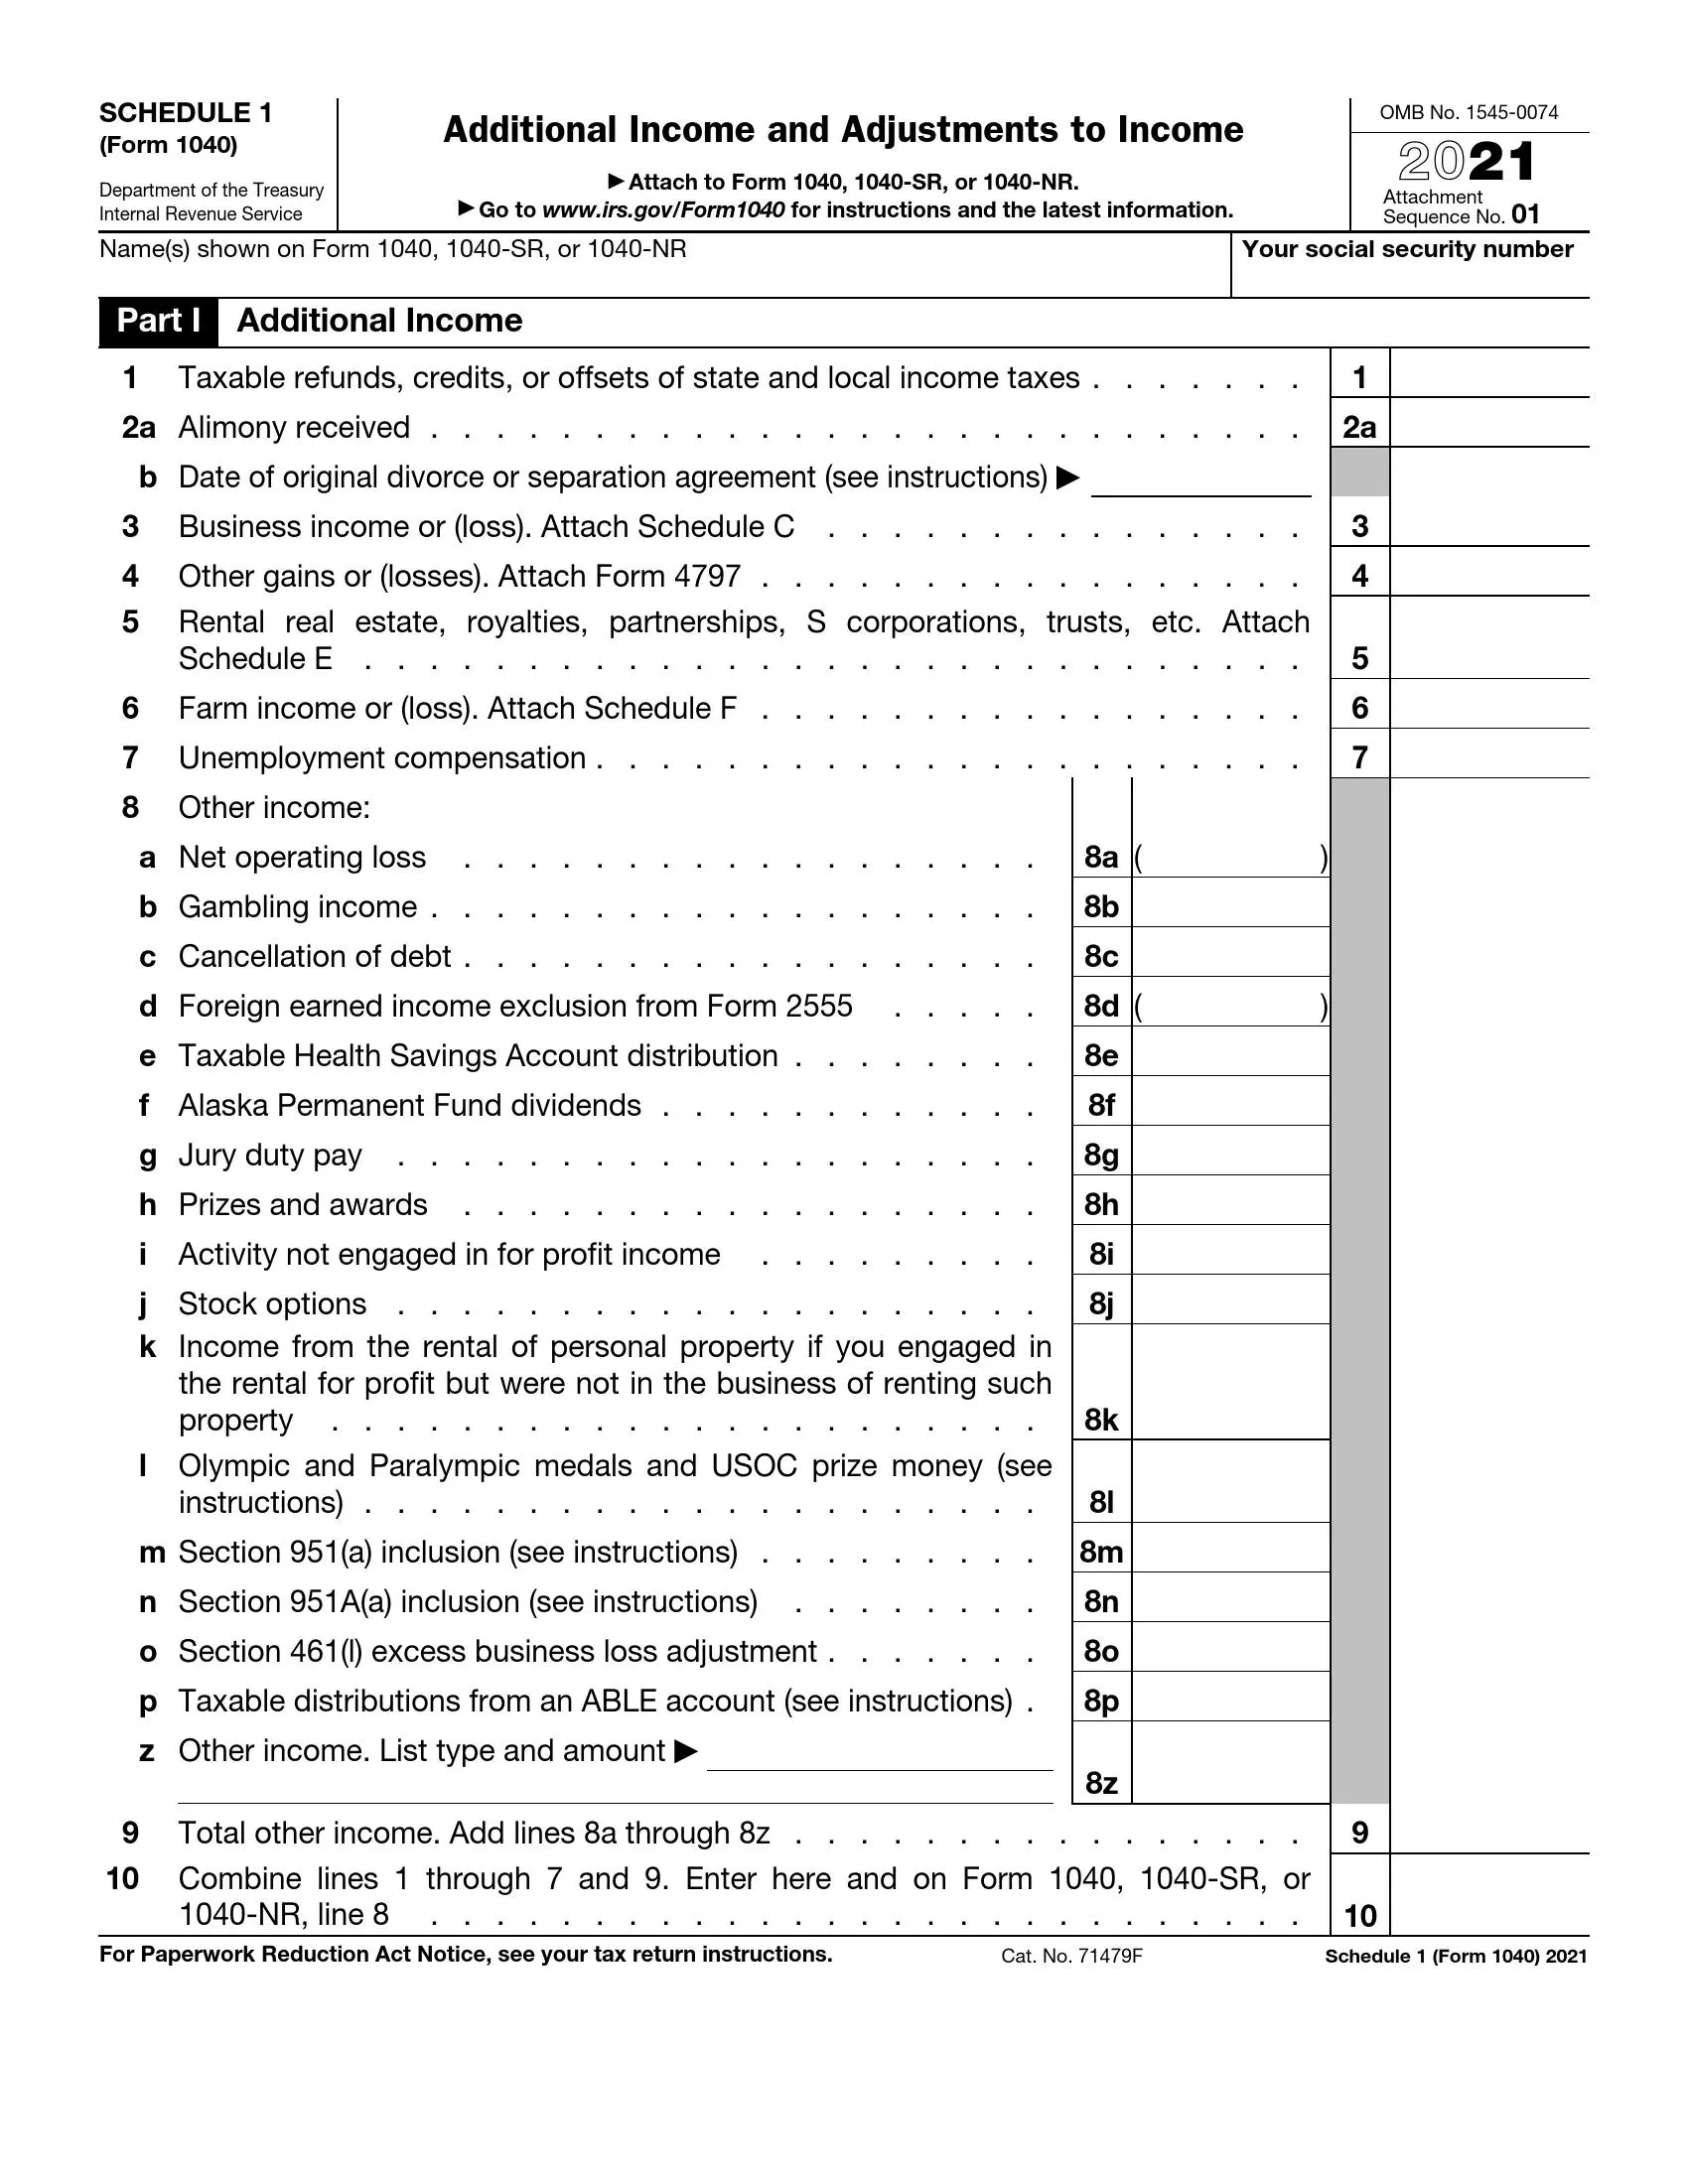 Irs 2022 Schedule 1 Irs Schedule 1 Form 1040 Or 1040-Sr ≡ Fill Out Pdf Forms Online